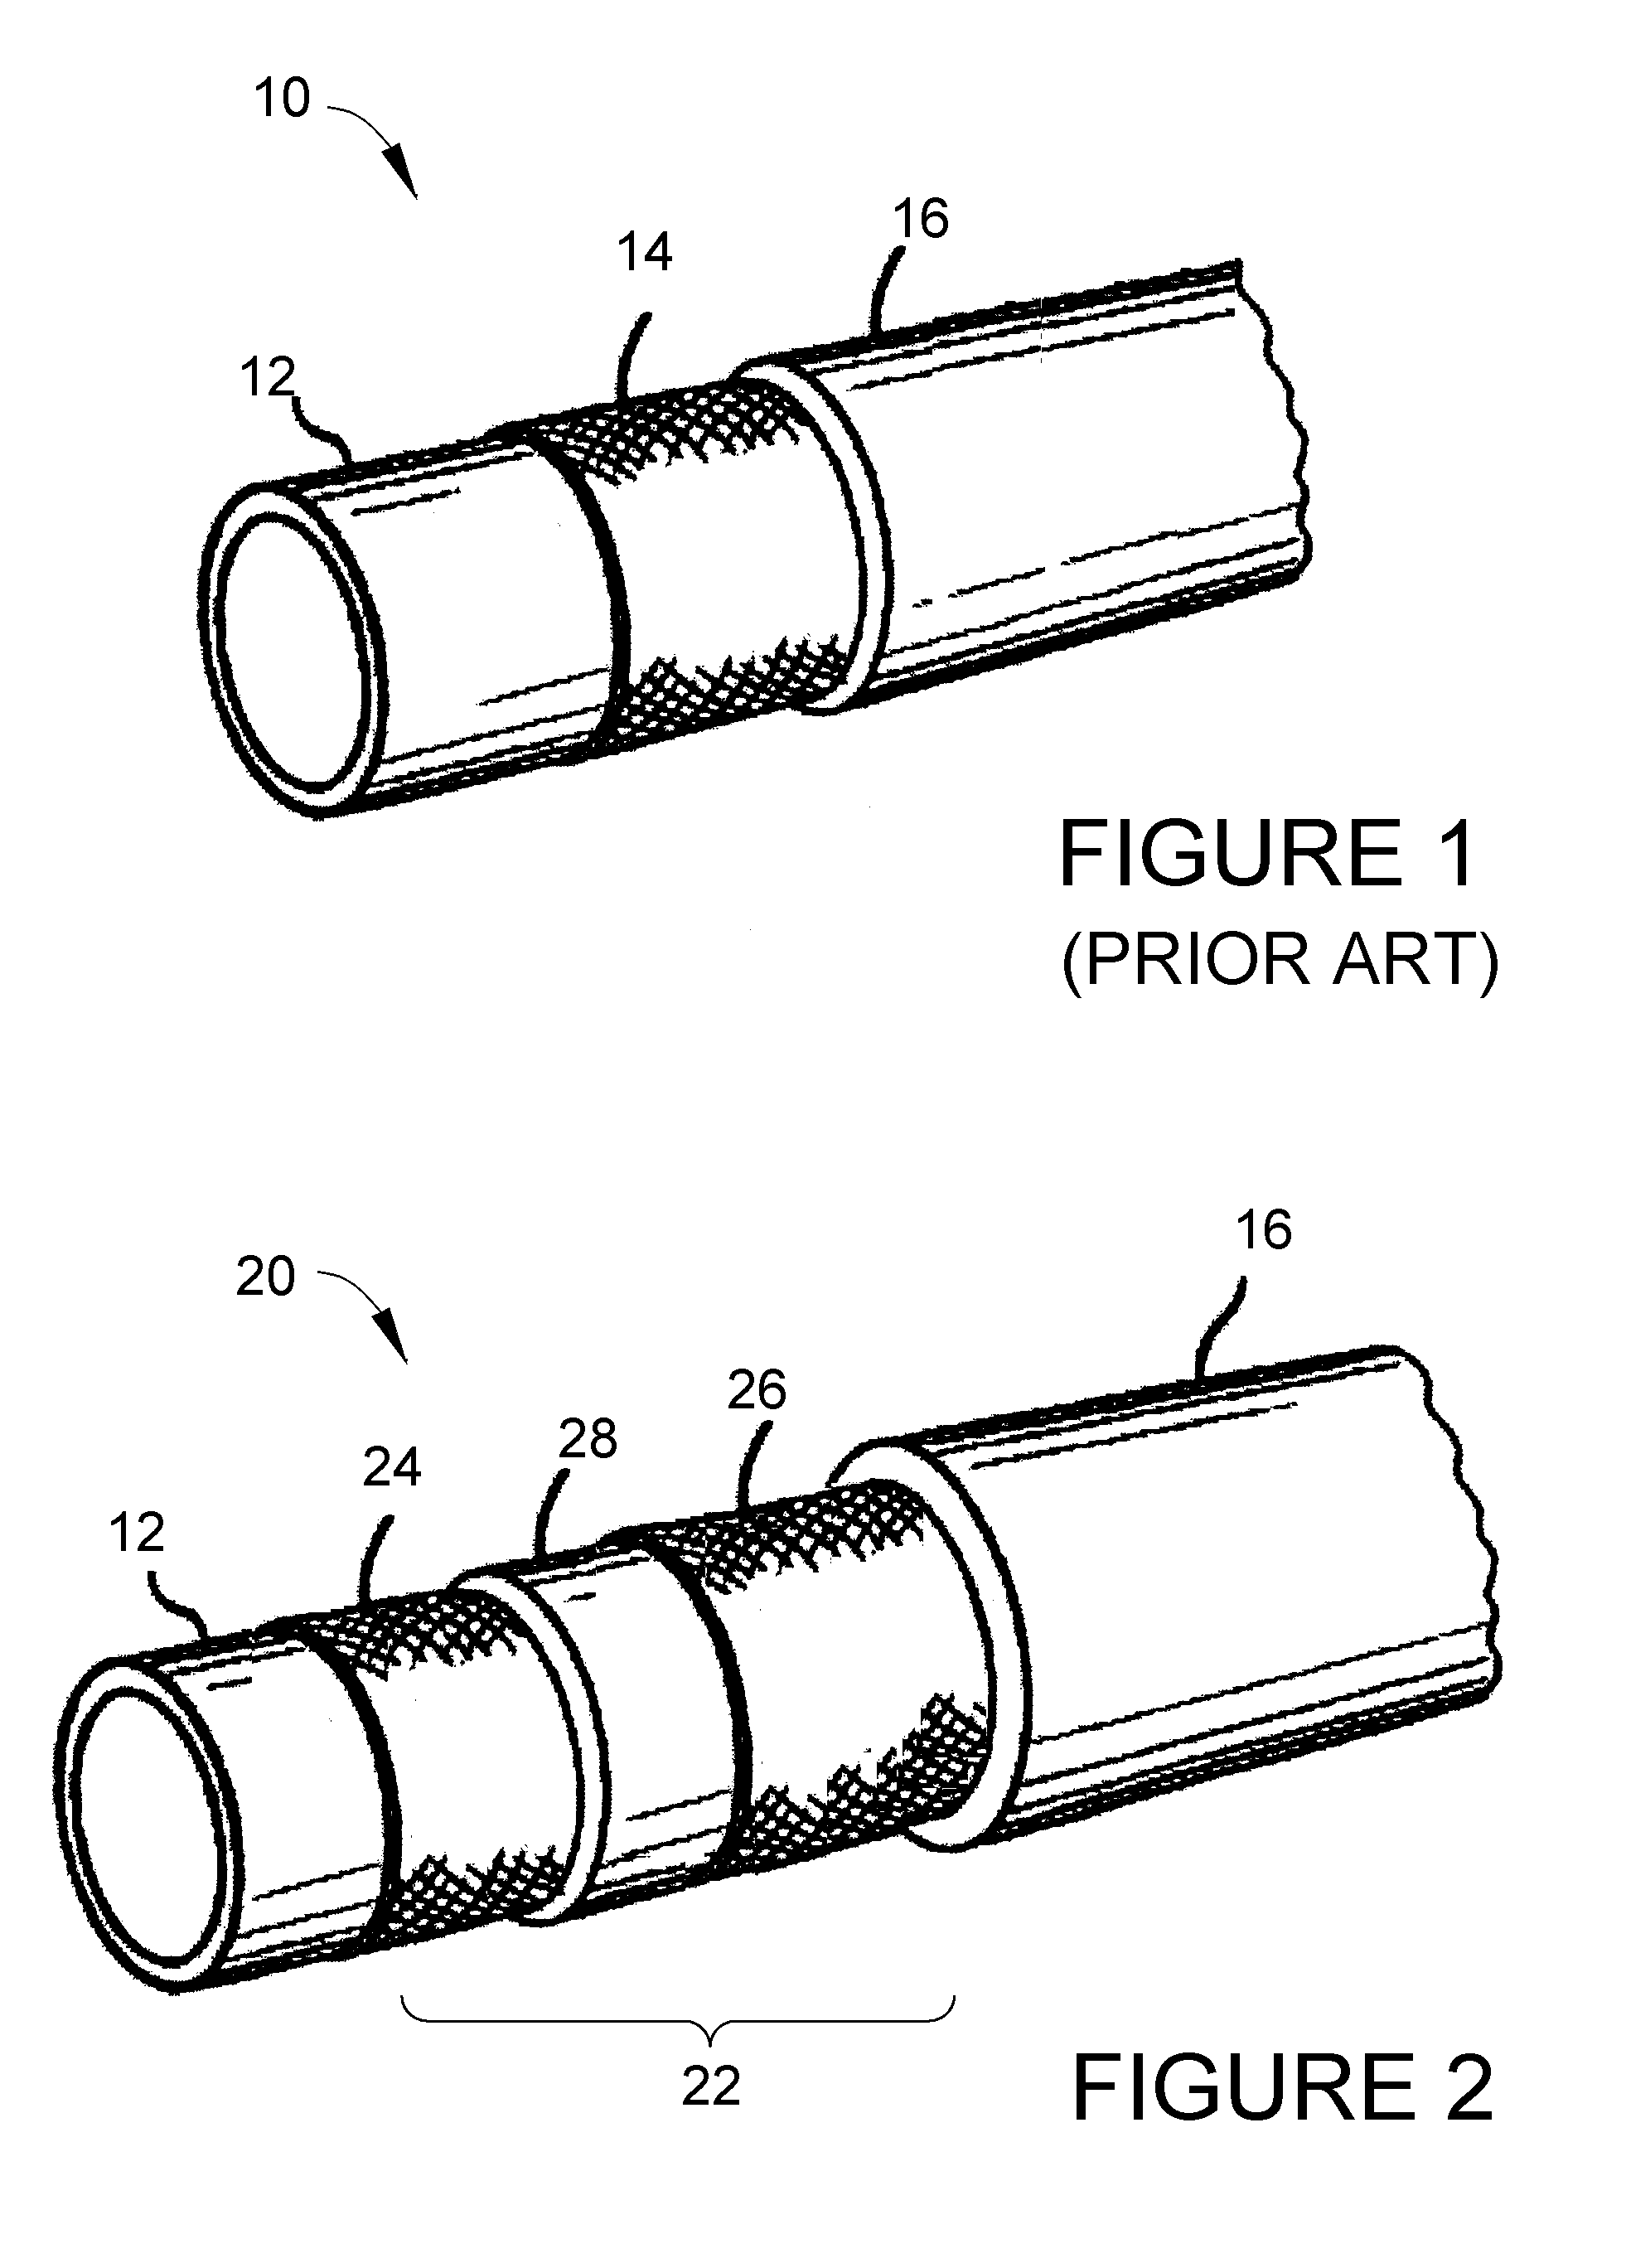 Hydraulic hose with integral life-sensing capability and method therefor